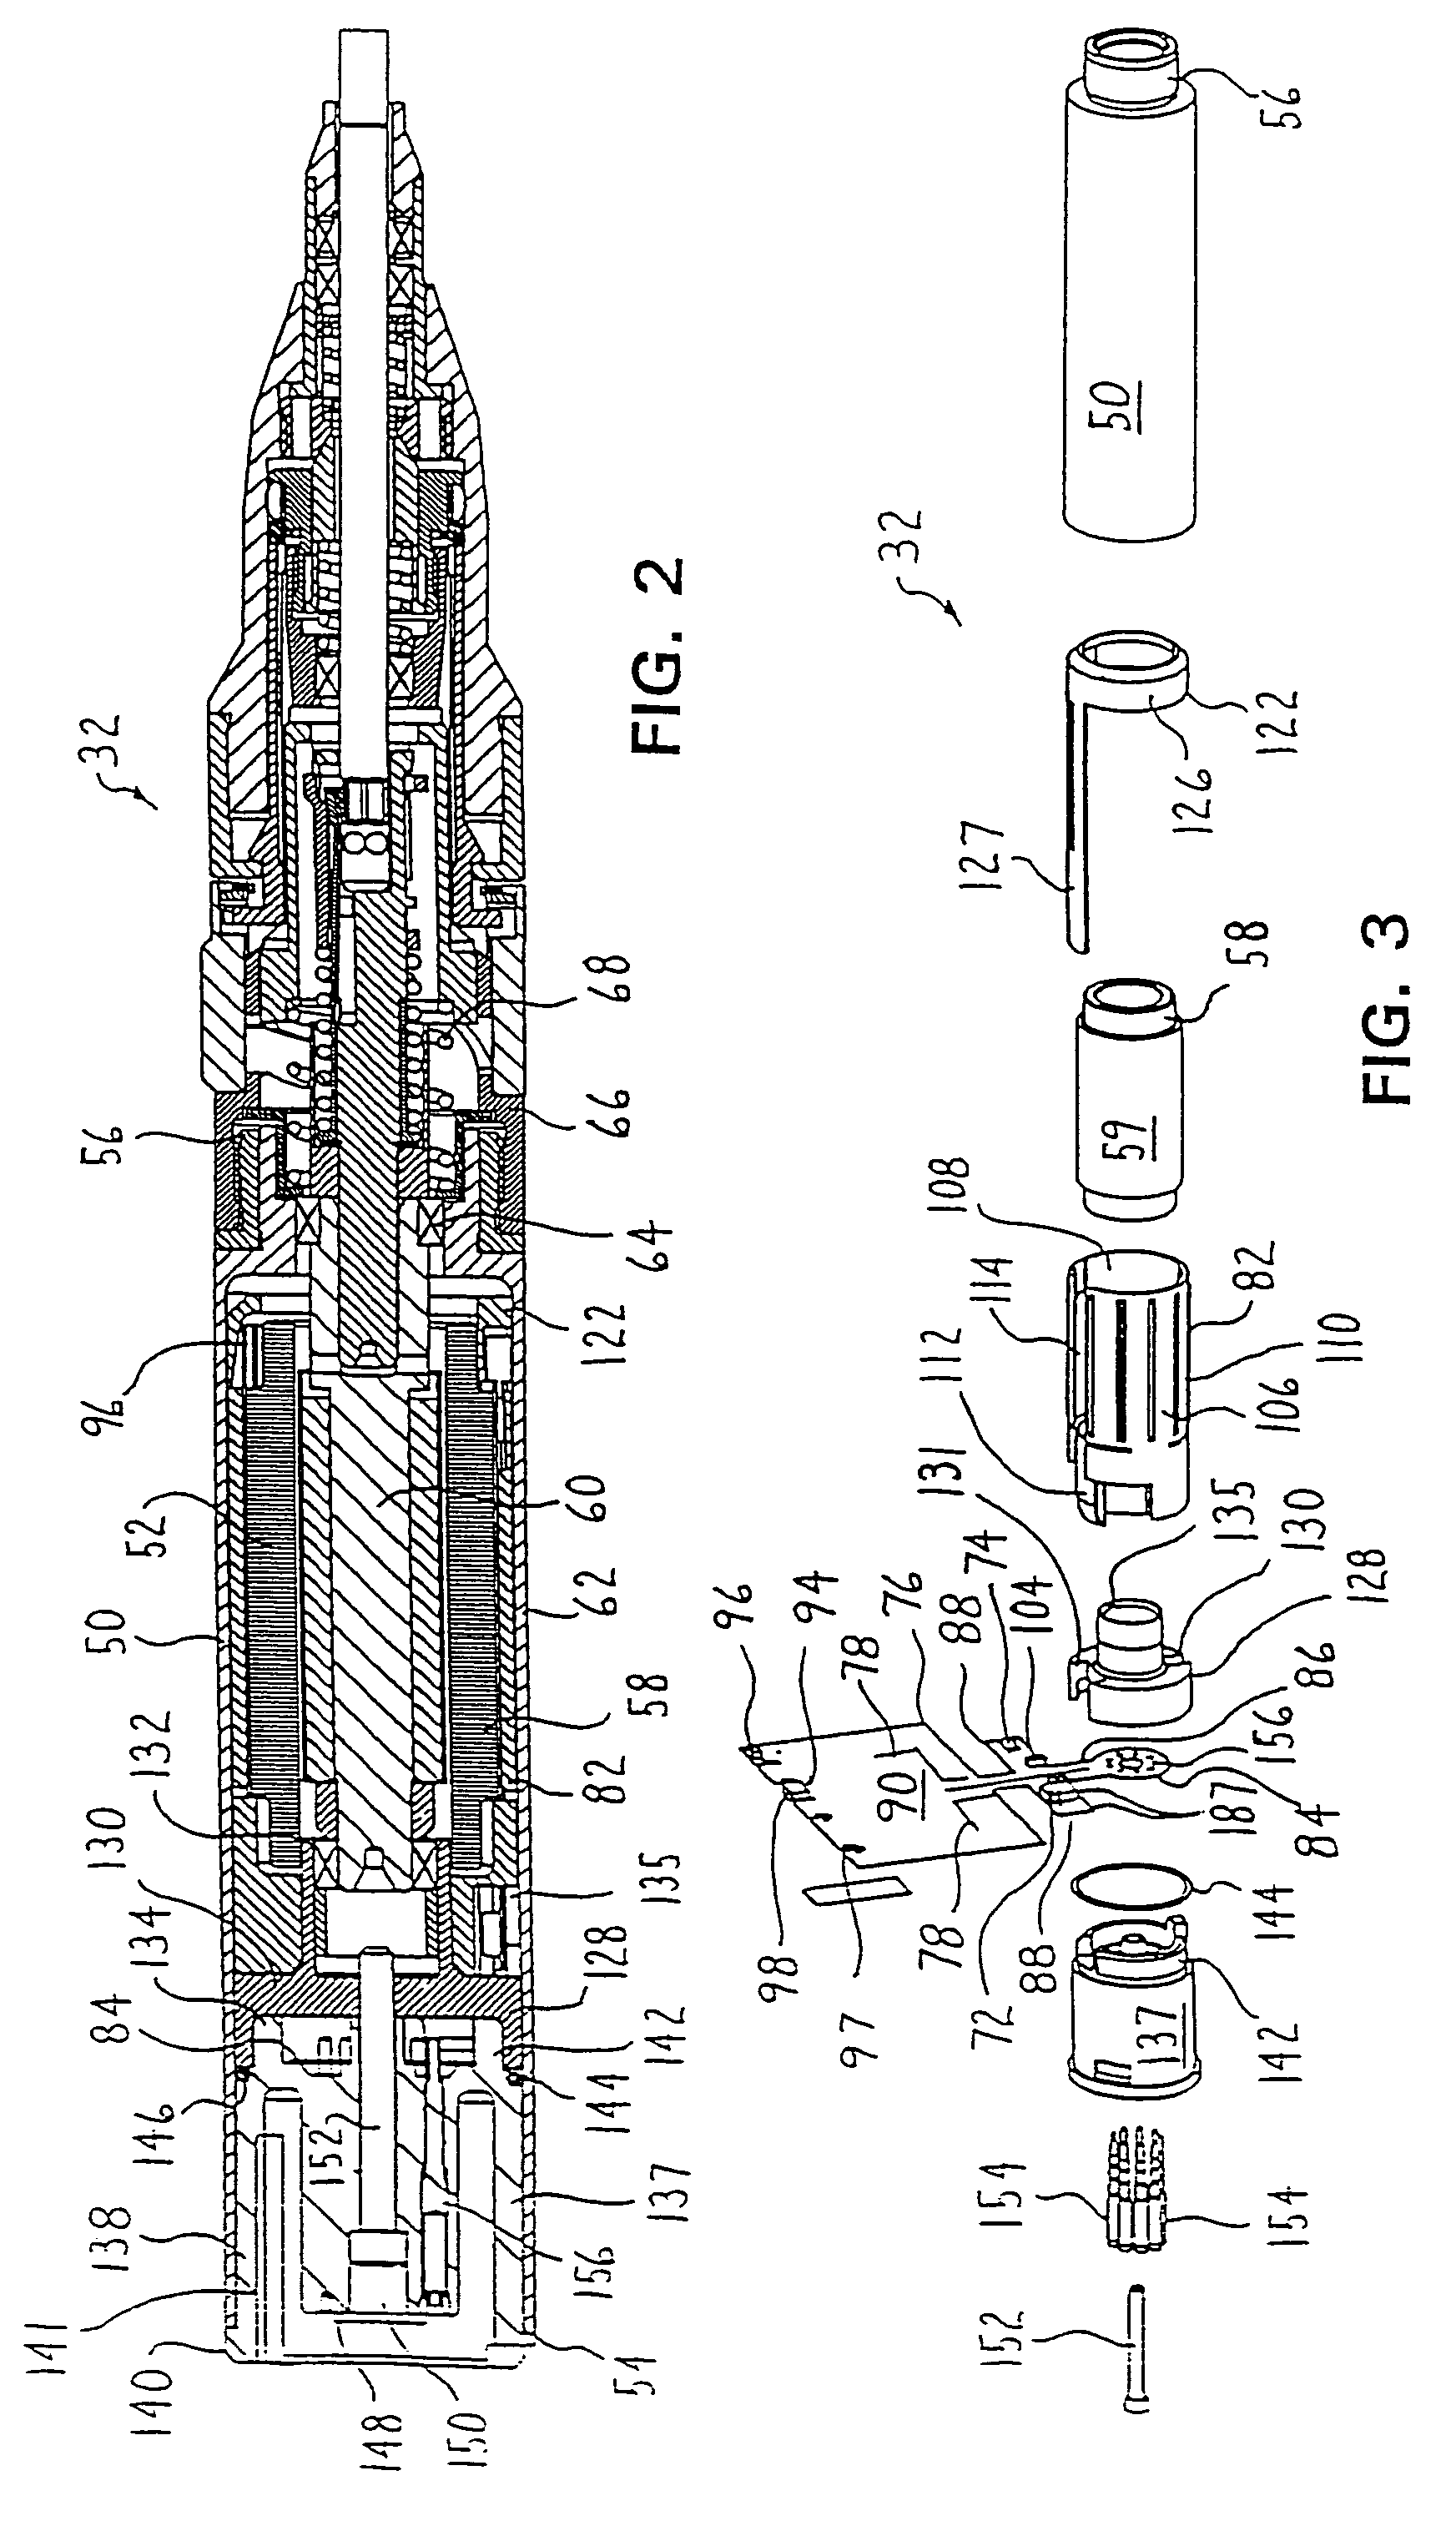 Surgical tool system including plural powered handpieces and a console to which the handpieces are simultaneously attached, the console able to energize each handpiece based on data stored in a memory integral with each handpiece